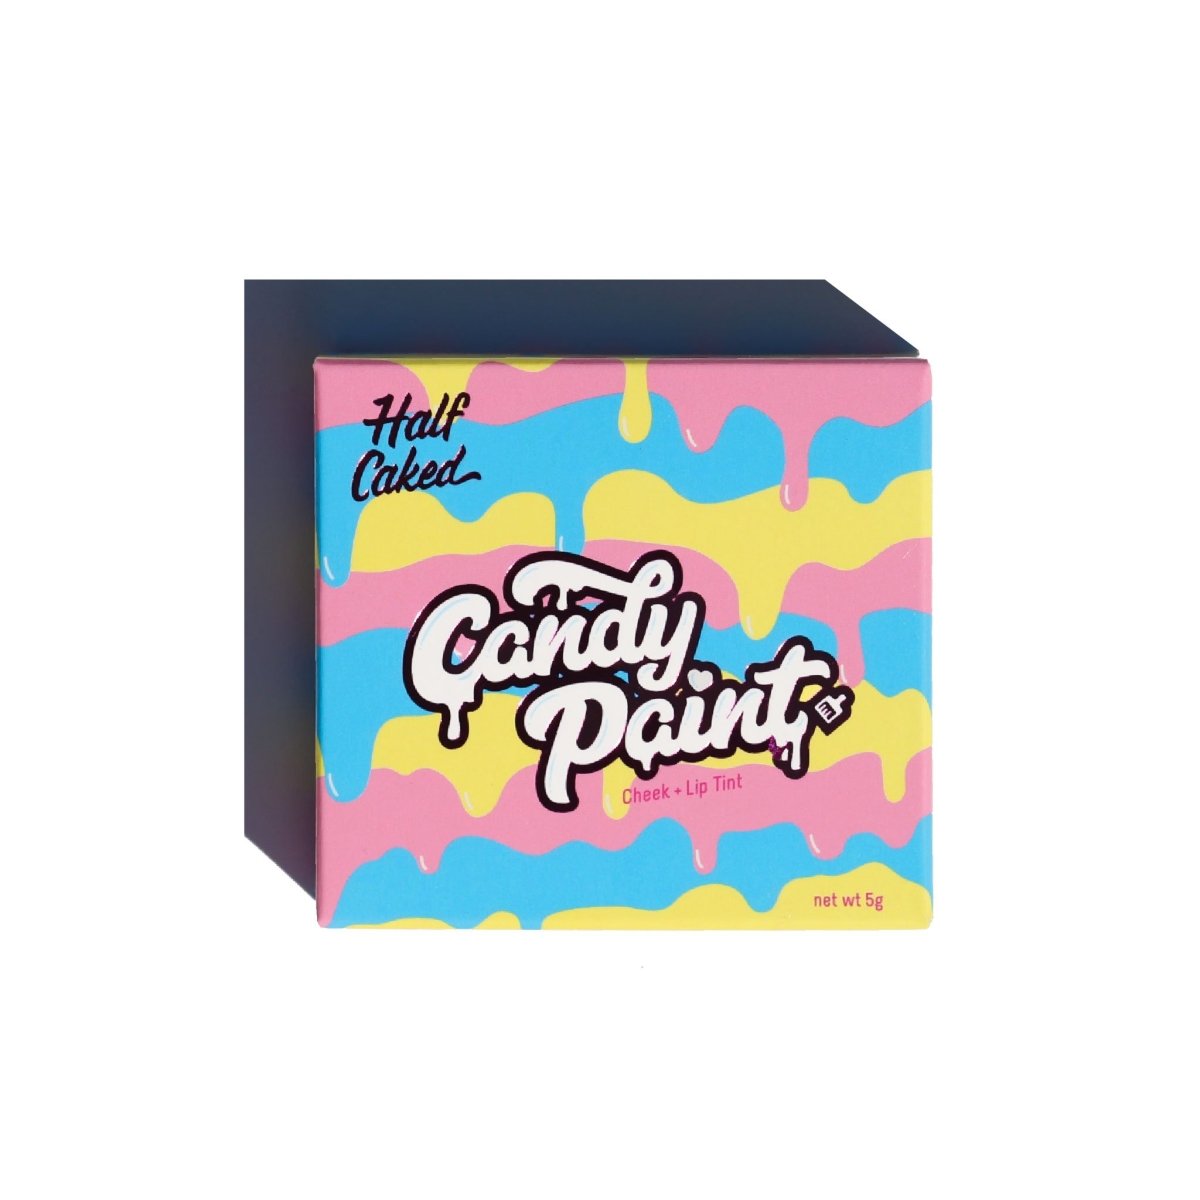 pink yellow blue box with candy paint on front - Glossy Set - Half Caked